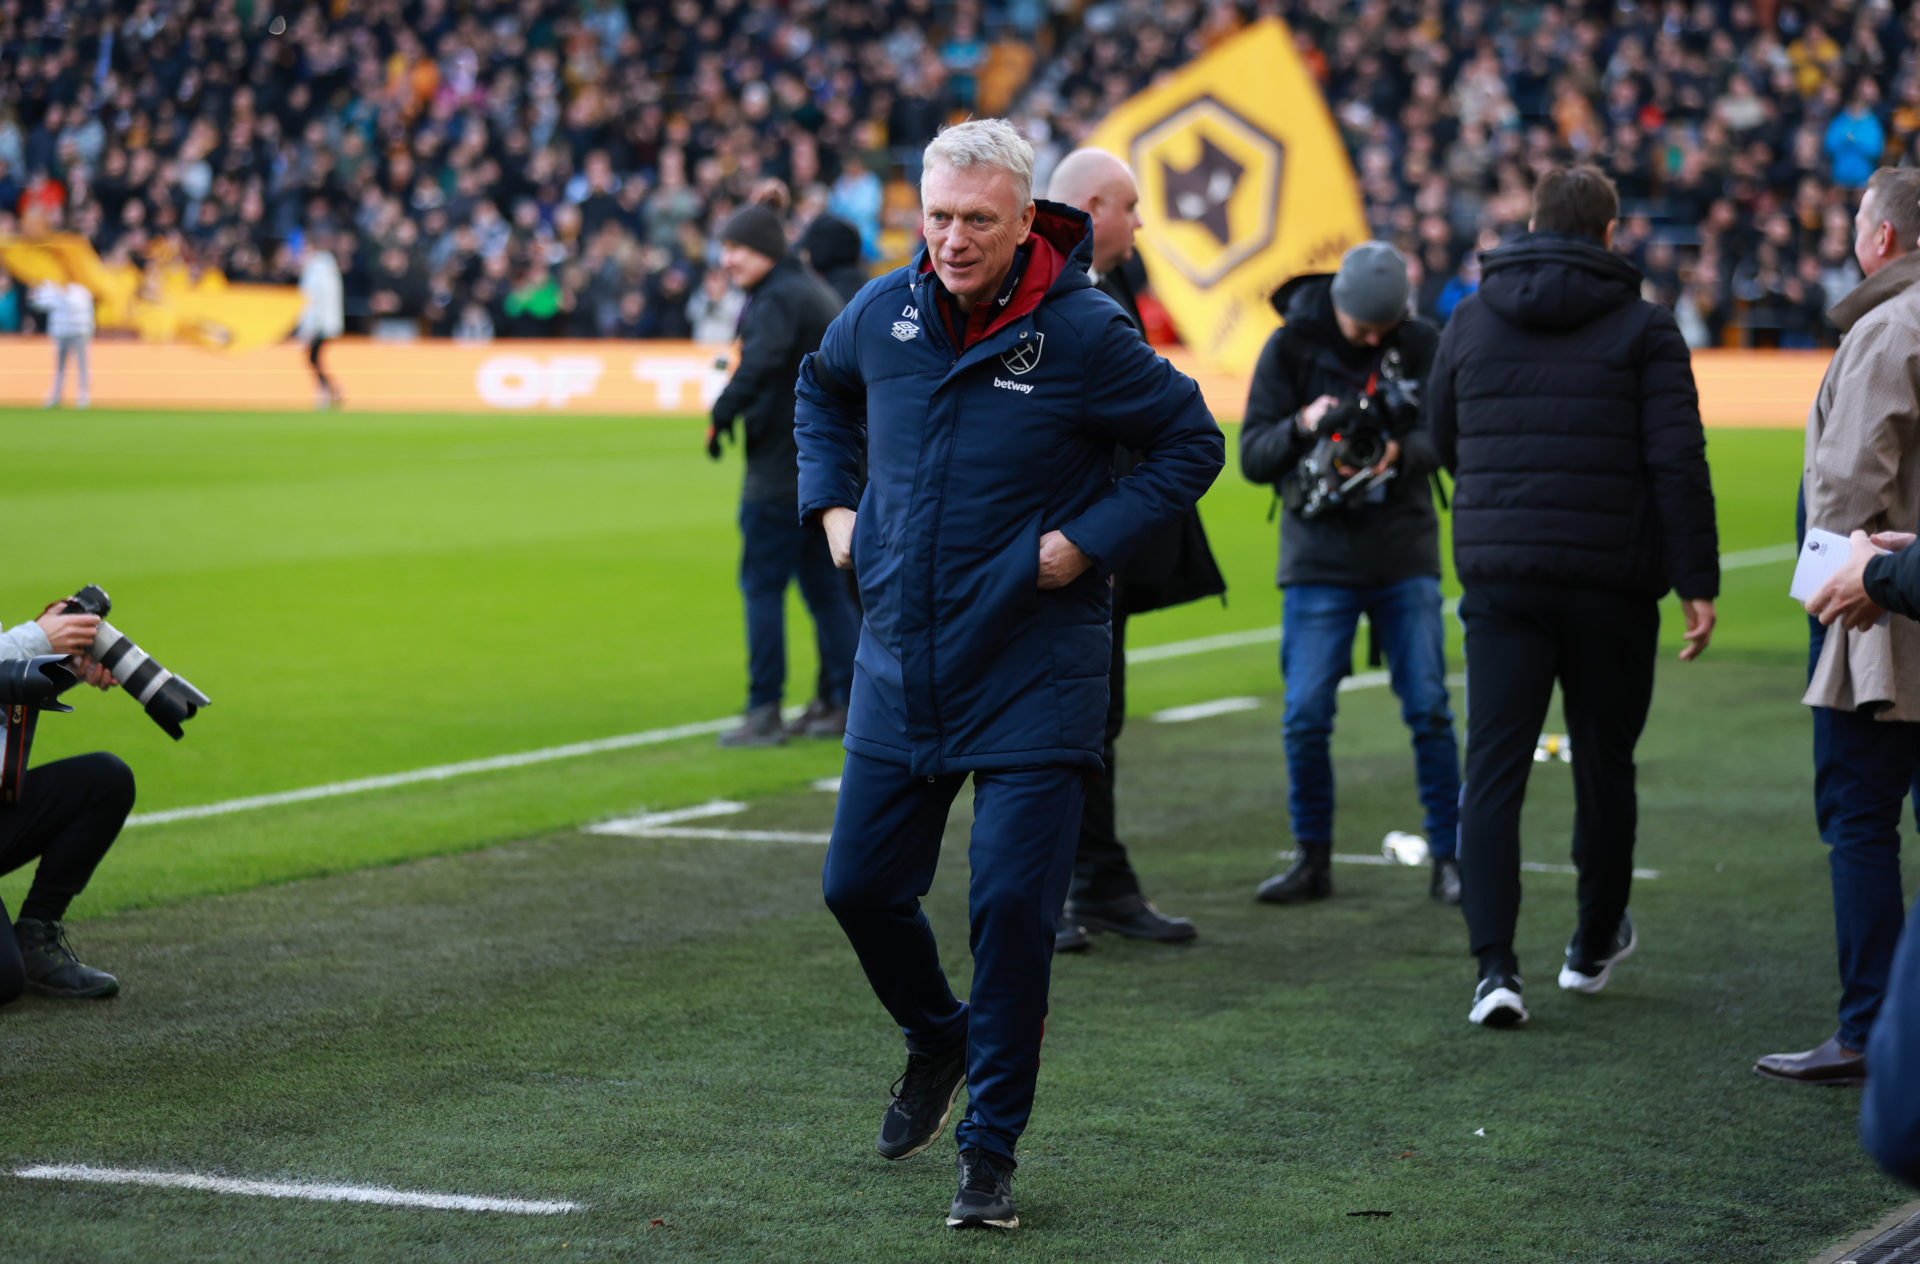 Chris Sutton shared what he noticed West Ham fans to David Moyes after Wolves defeat